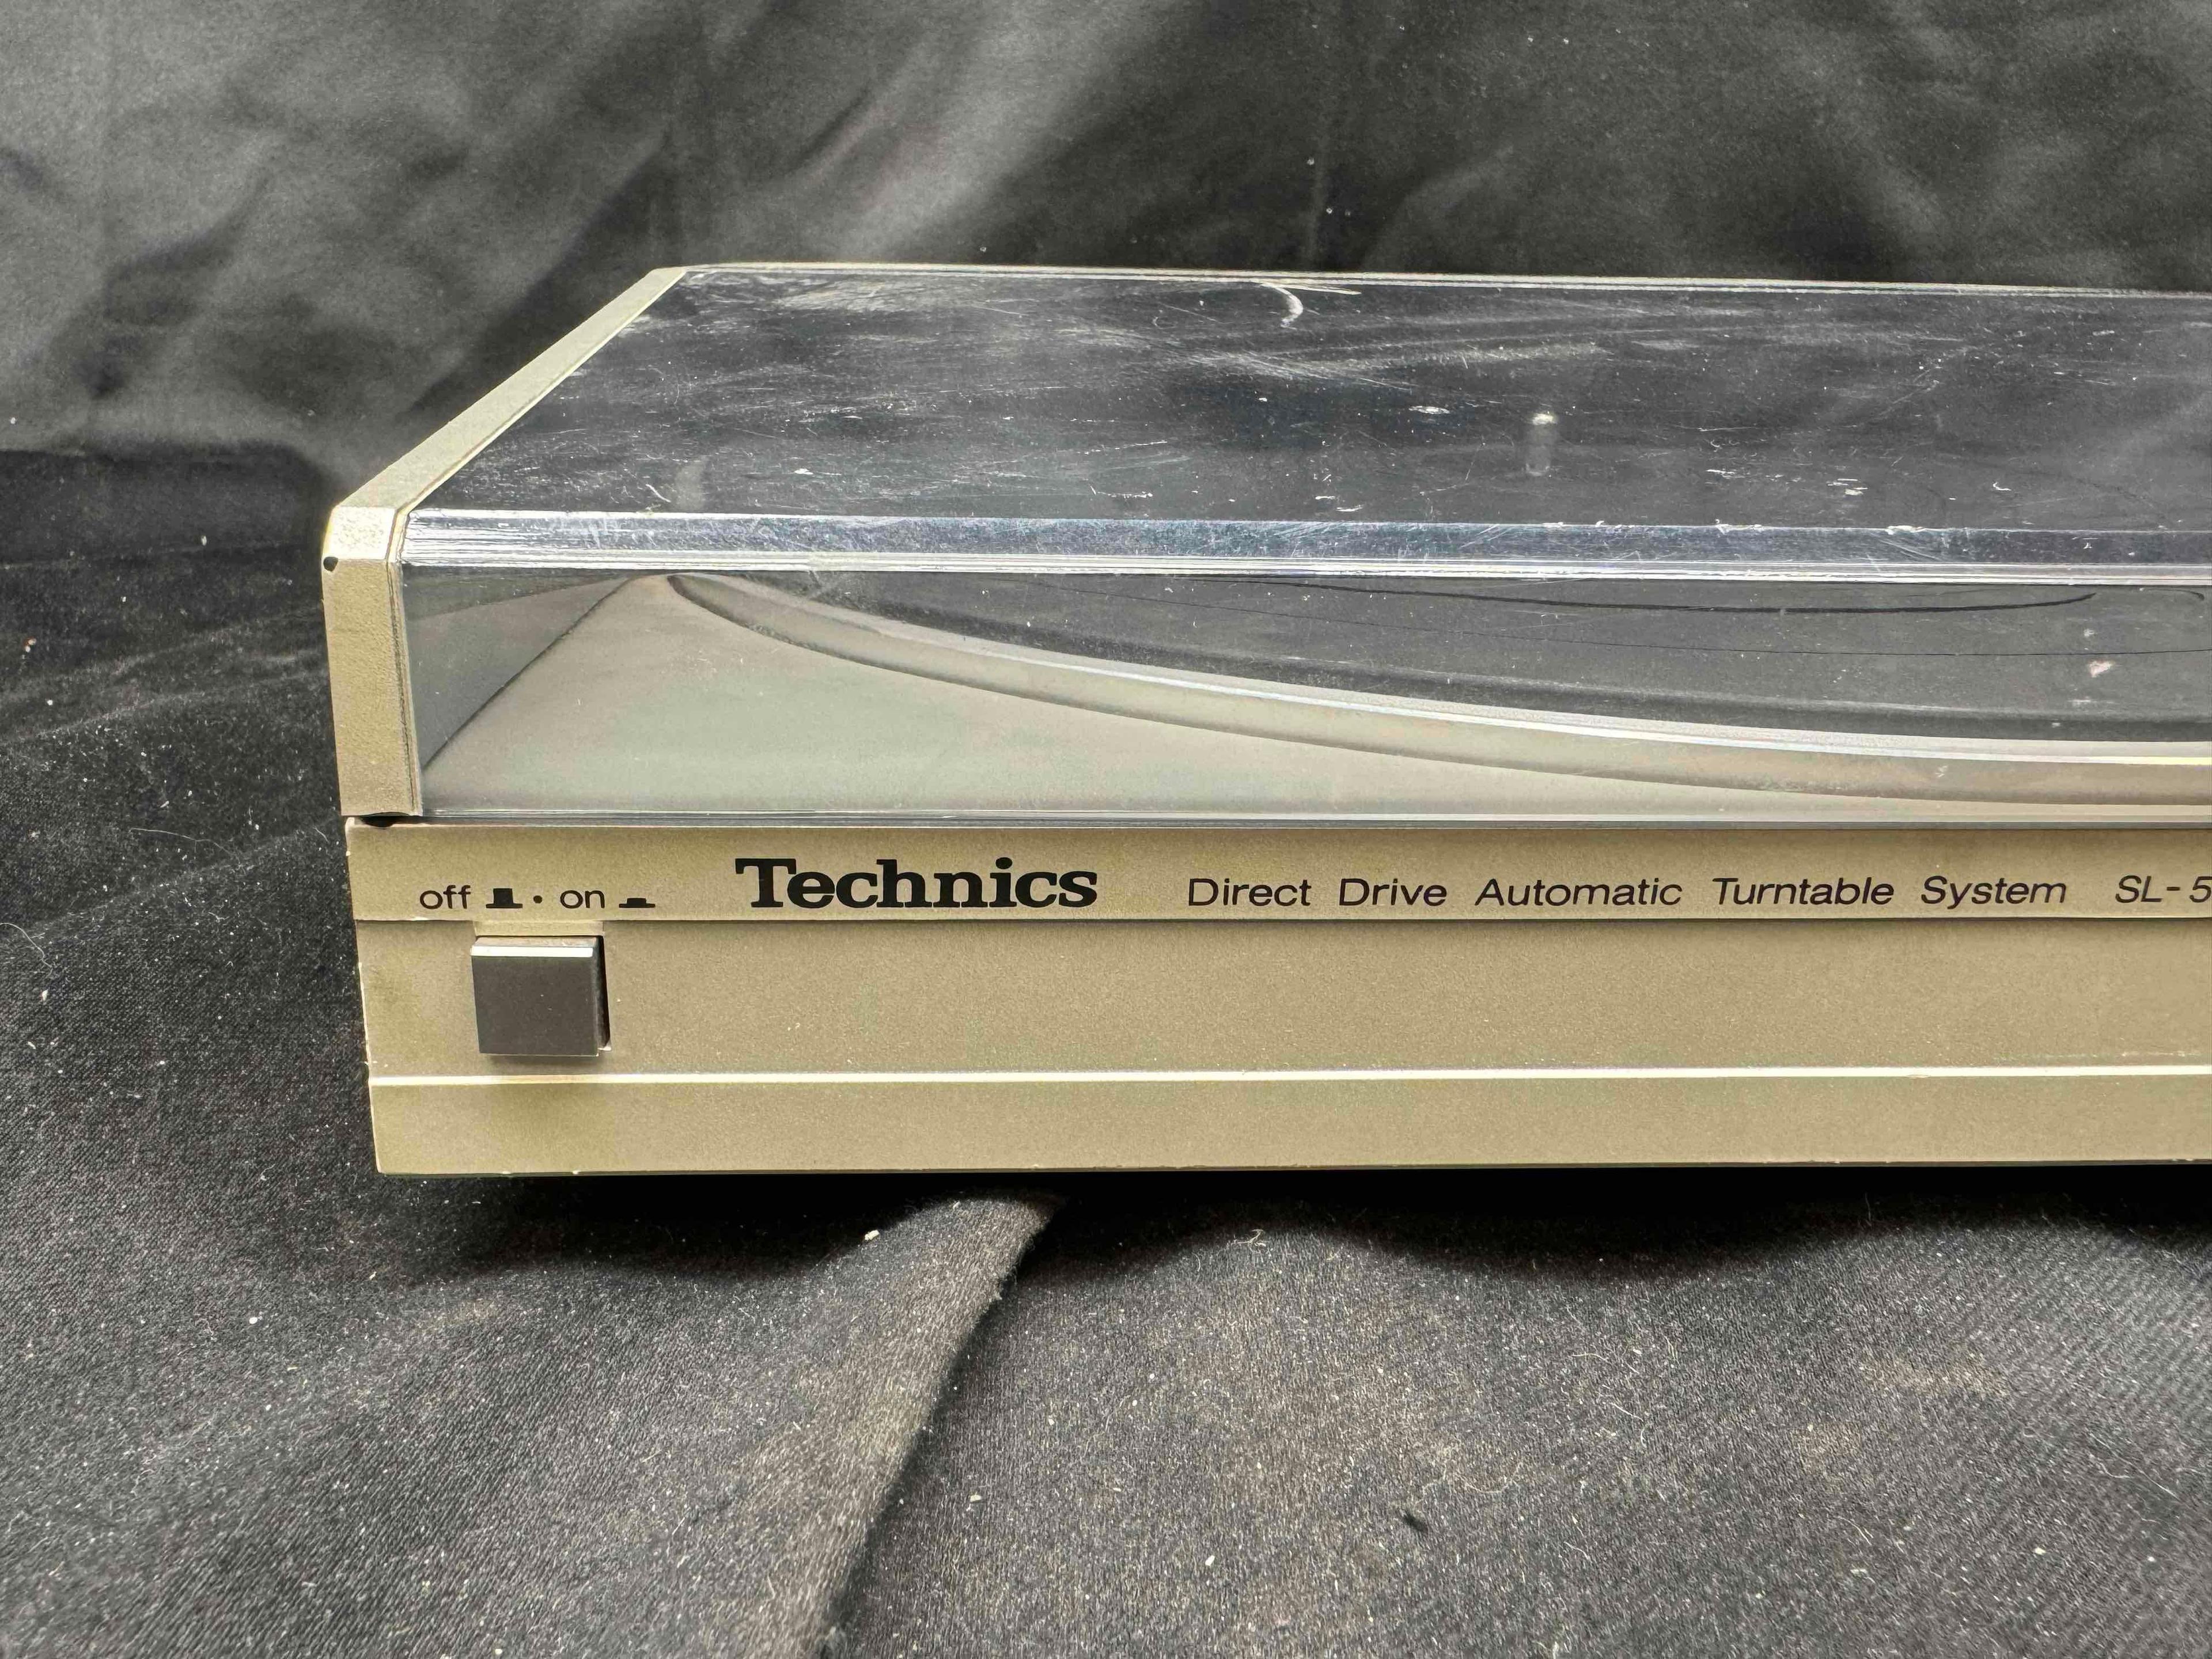 Technics Direct Drive Automatic Turntable System SL-5